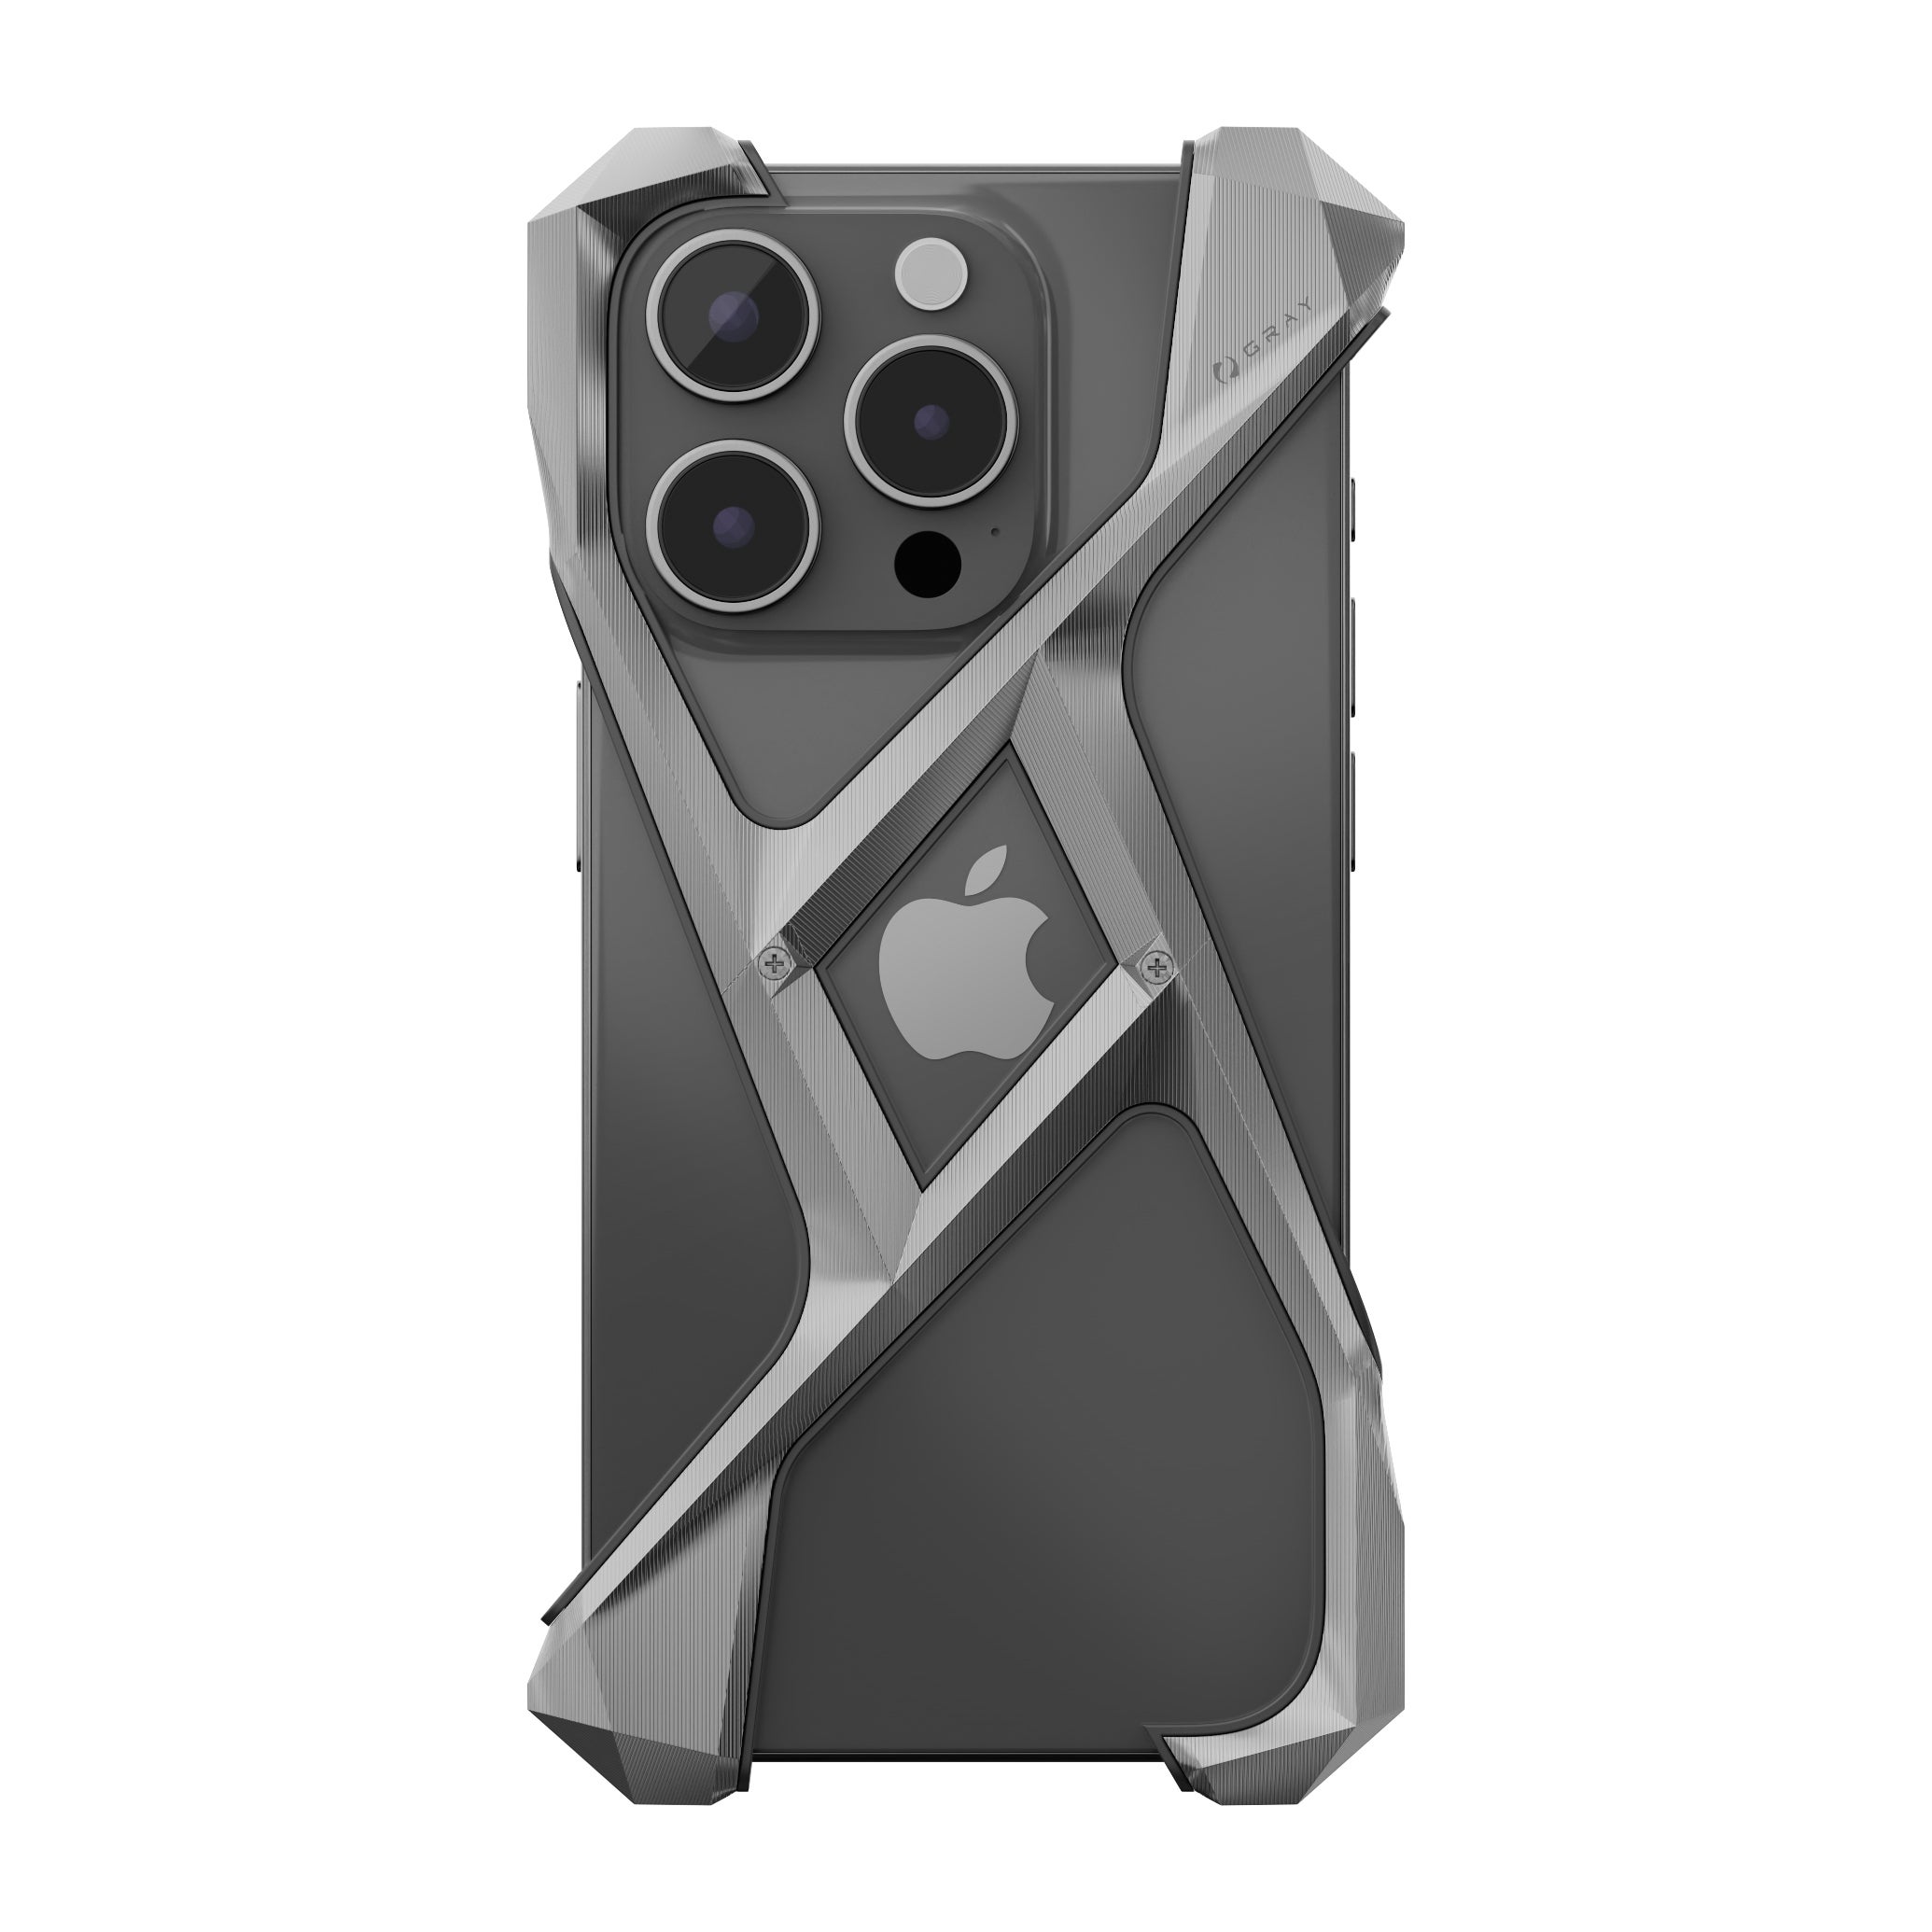 The Alter Ego Natural Titanium case for the iPhone 15 Pro - This case for the iPhone 15 Pro and iPhone 15 Pro Max costs more than what you paid for your phone